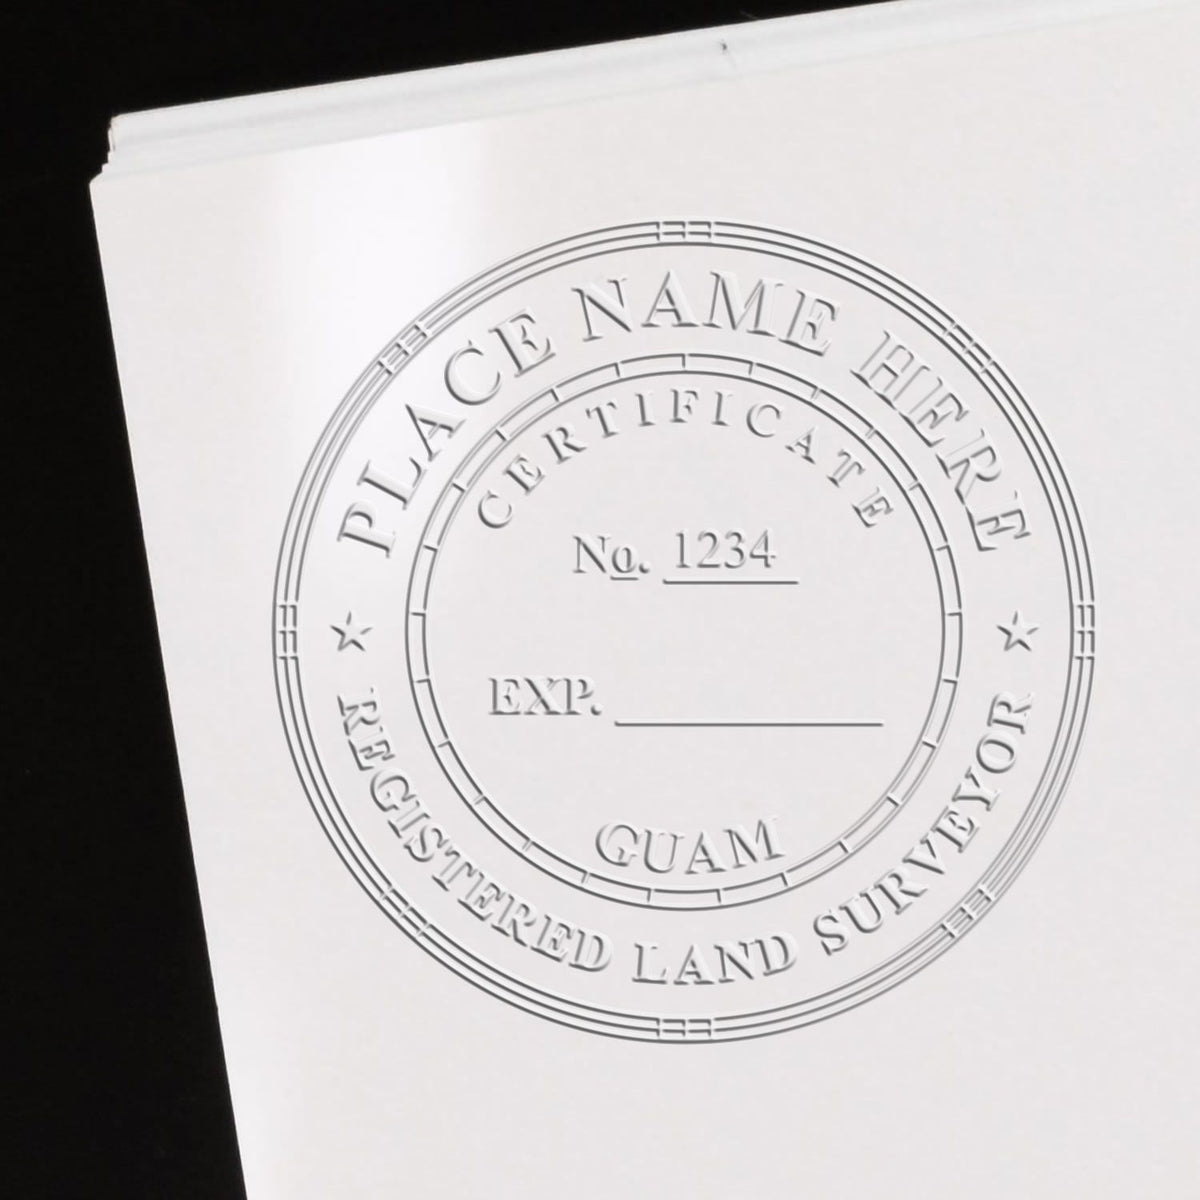 A stamped impression of the Long Reach Guam Land Surveyor Seal in this stylish lifestyle photo, setting the tone for a unique and personalized product.